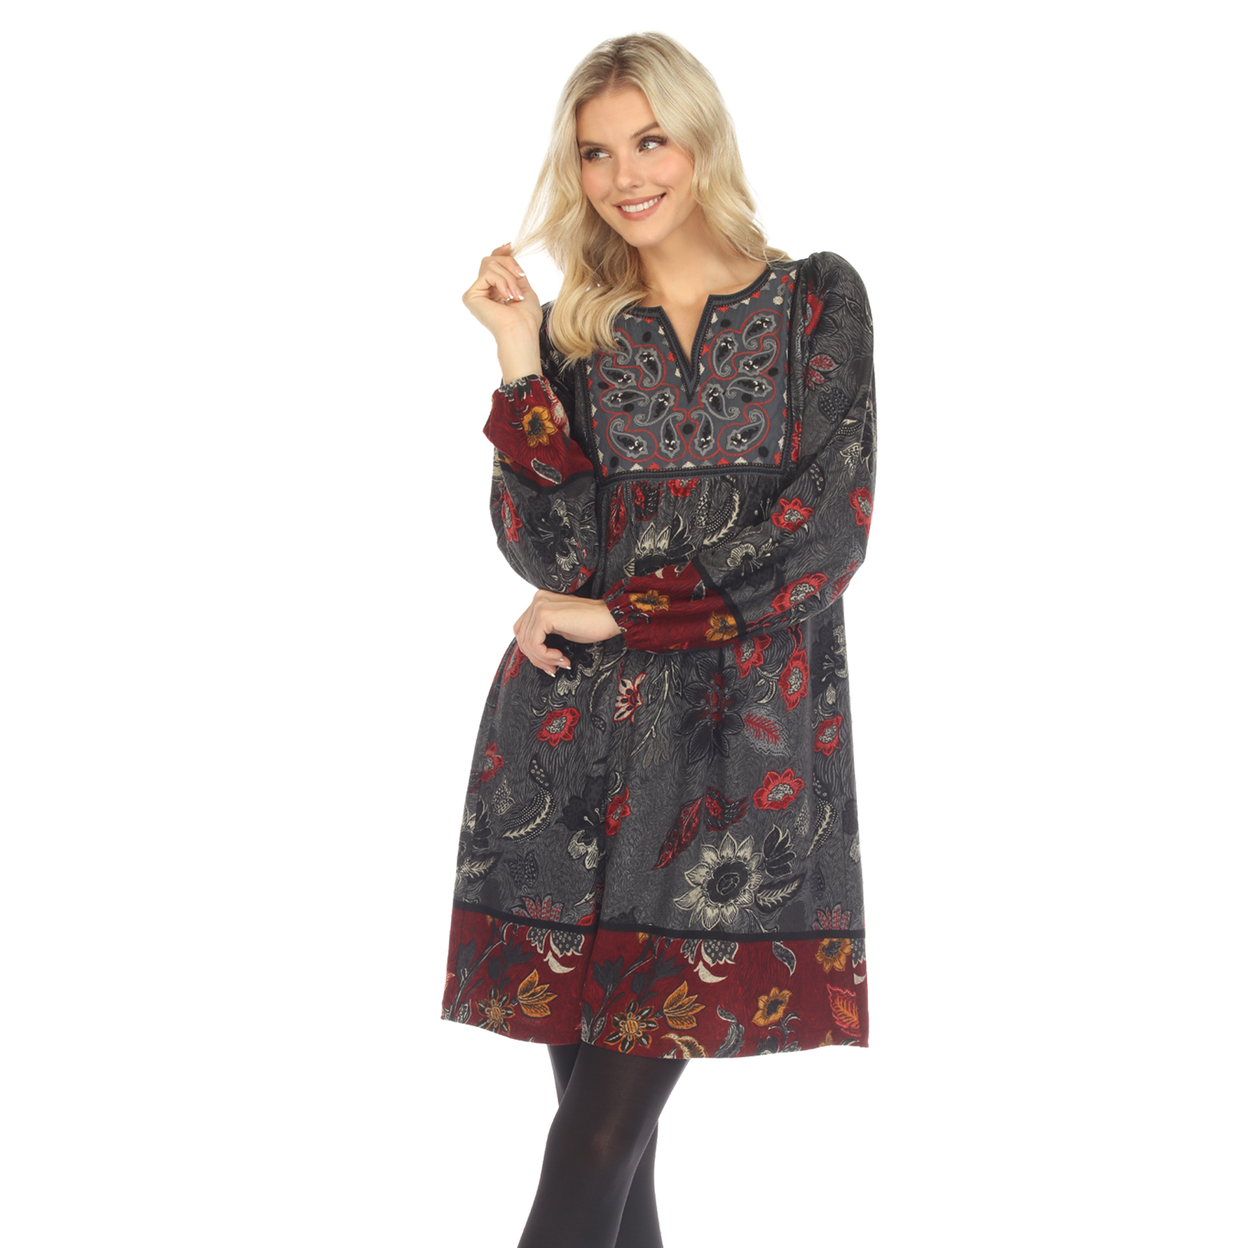 White Mark Women's Floral Paisley Sweater Dress - Grey/red, Small